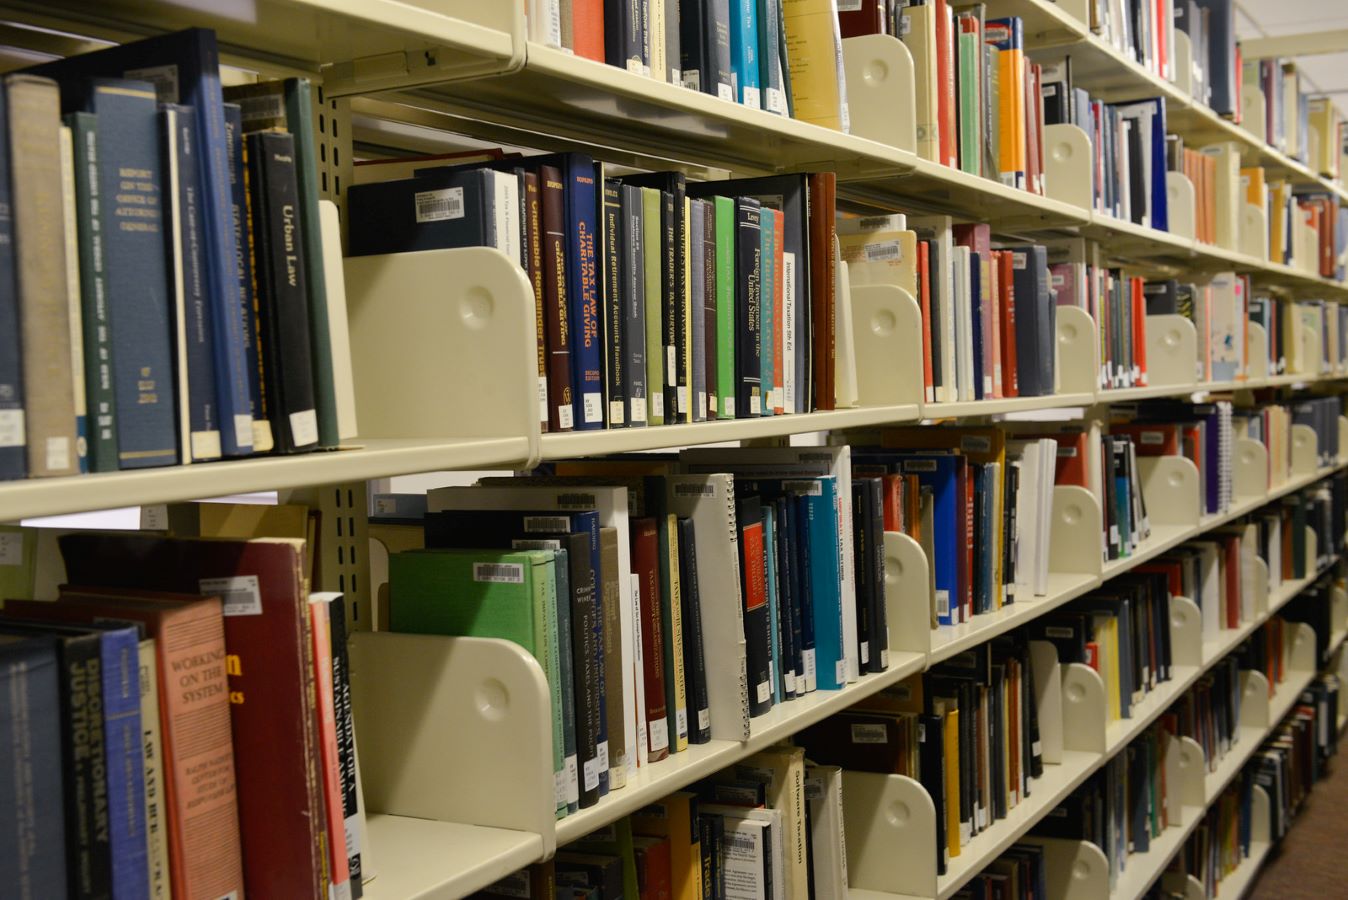 Shelves of books in the W. W. Hagerty Library